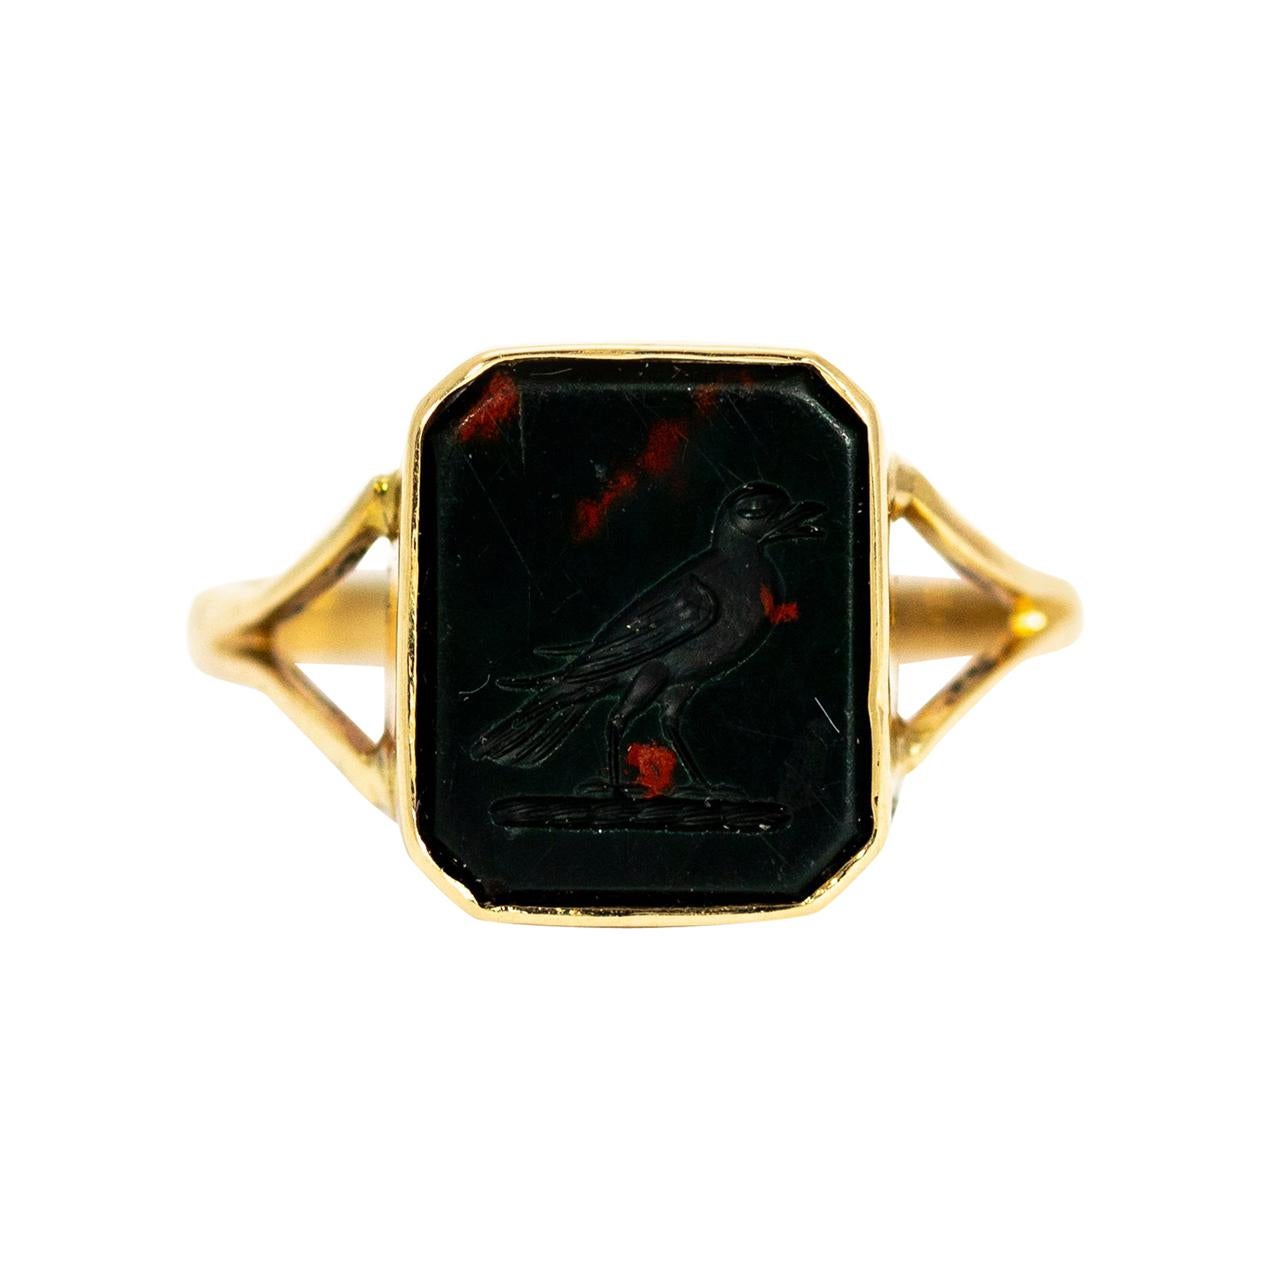 Mid-19th Century Bloodstone with Bird Engraving and 9 Carat Gold Signet Ring